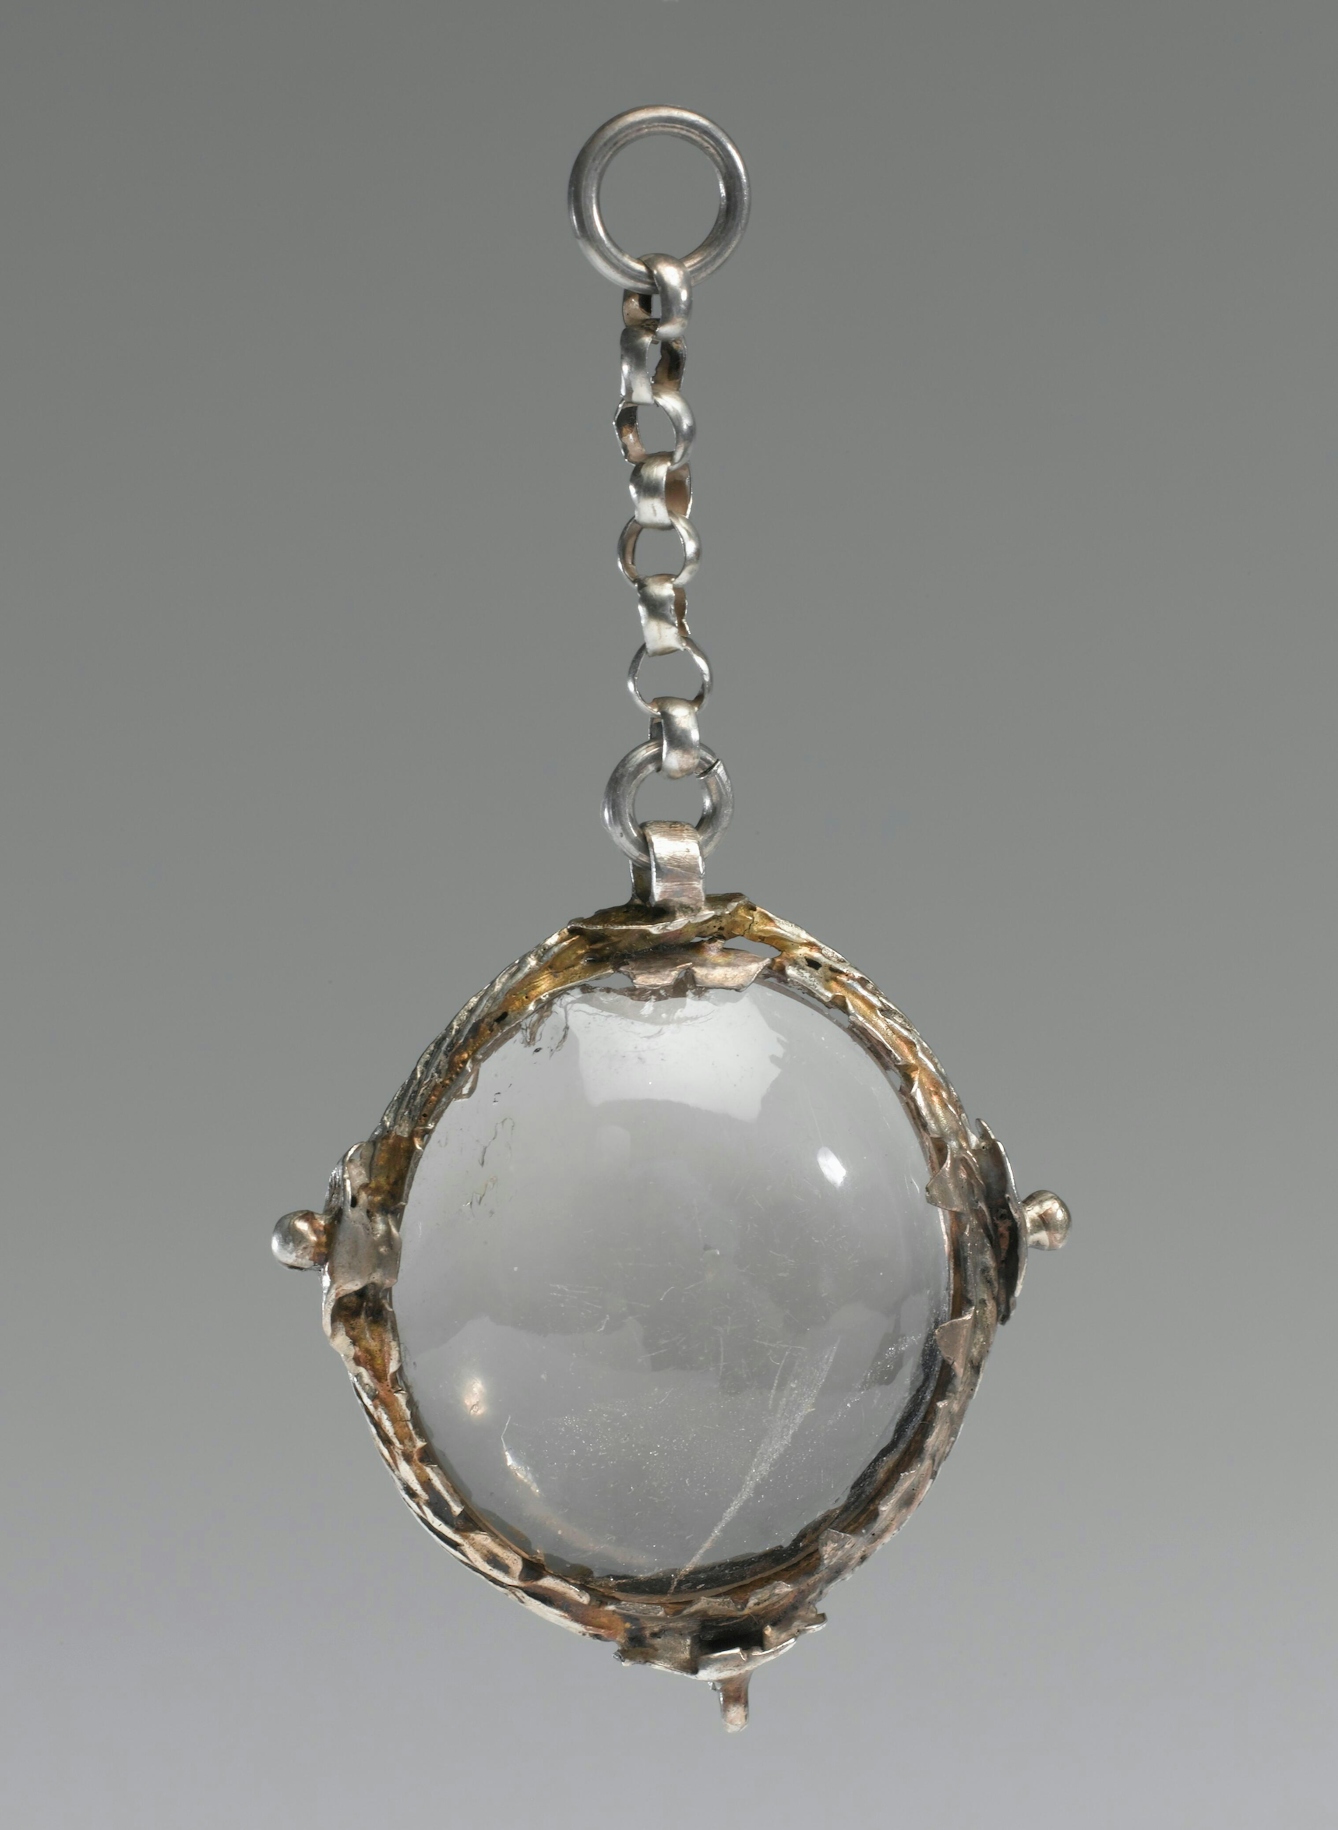 Photograph of a polished oval crystal set in a silver frame, hanging from a short chain, against a grey background.